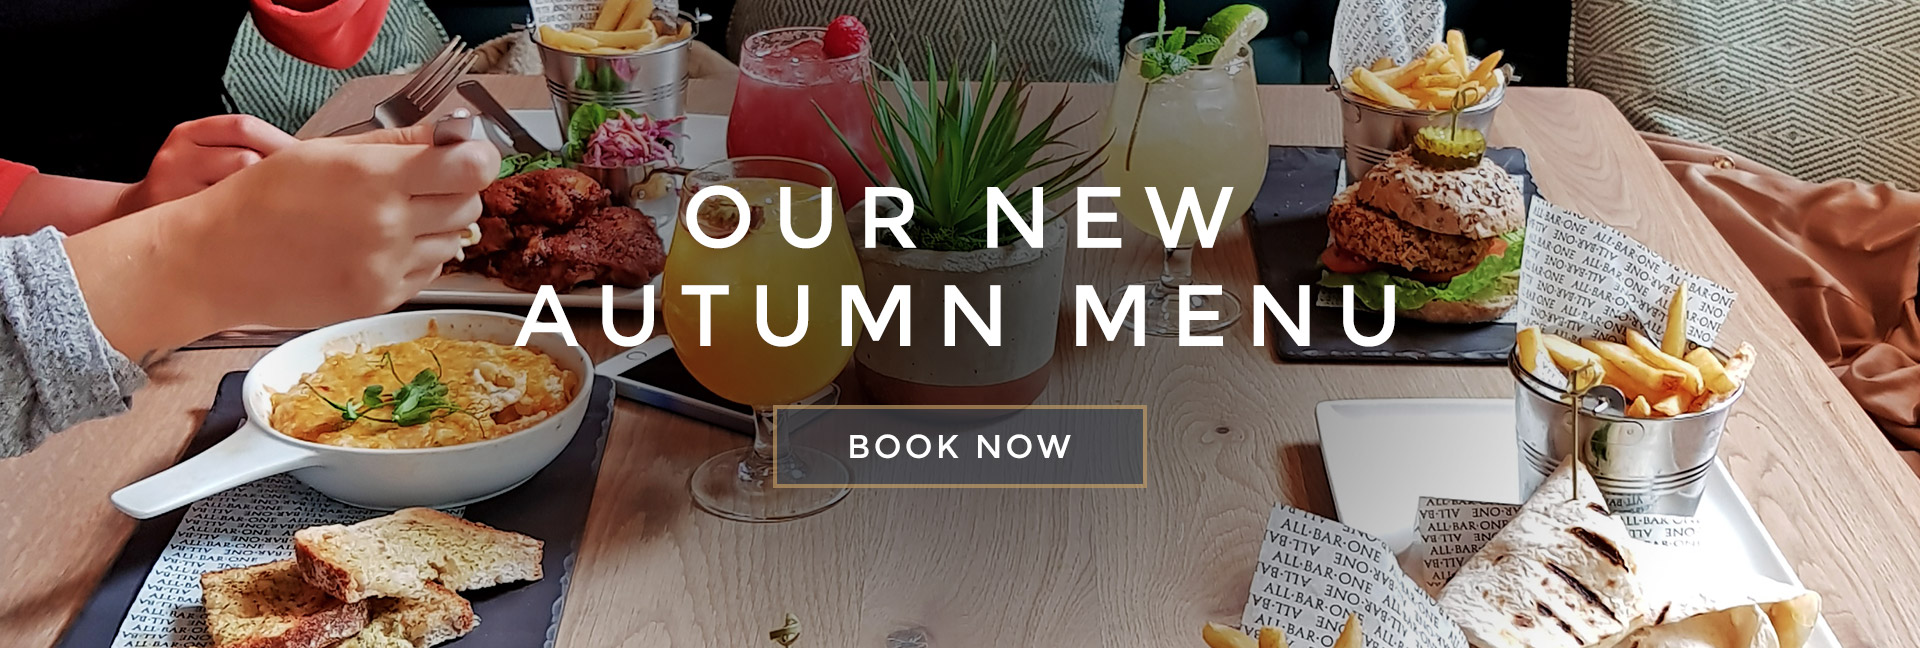 Our new Autumn menu at All Bar One Manchester - Book now